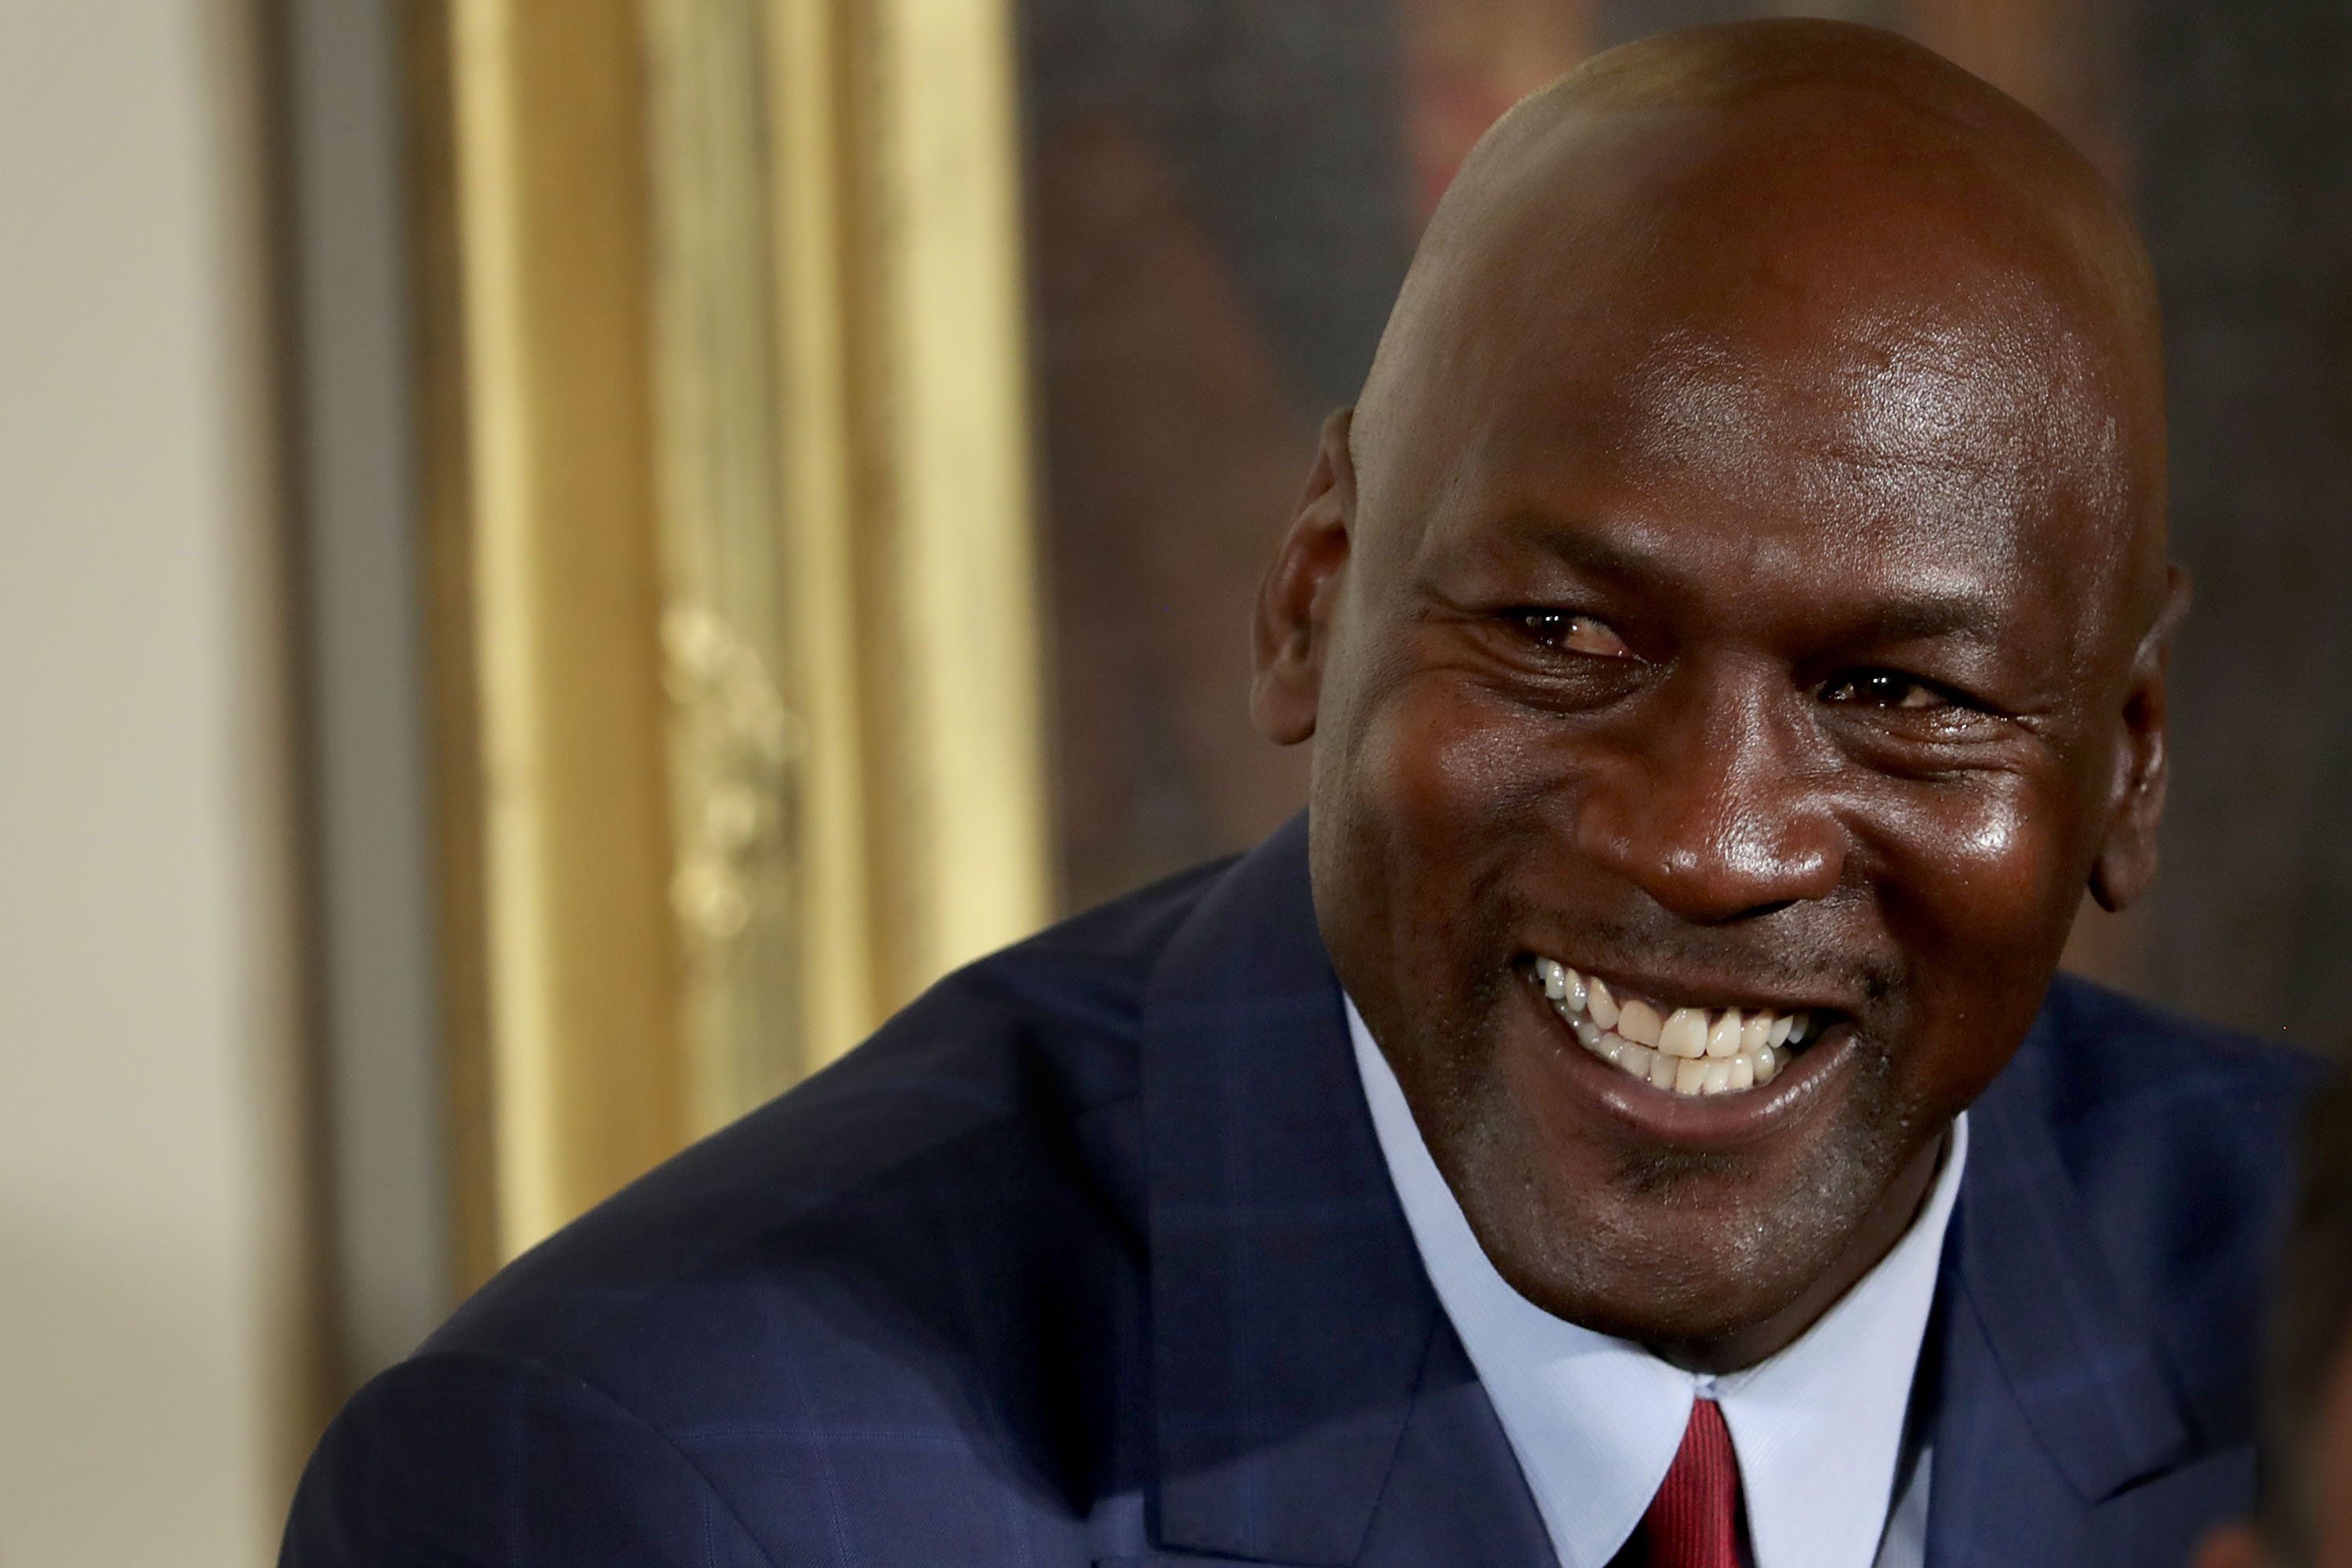 Michael Jordan is awarded the Presidential Medal of Freedom by U.S. President Barack Obama in the East Room of the White House November 22, 2016 | Source: Getty Images